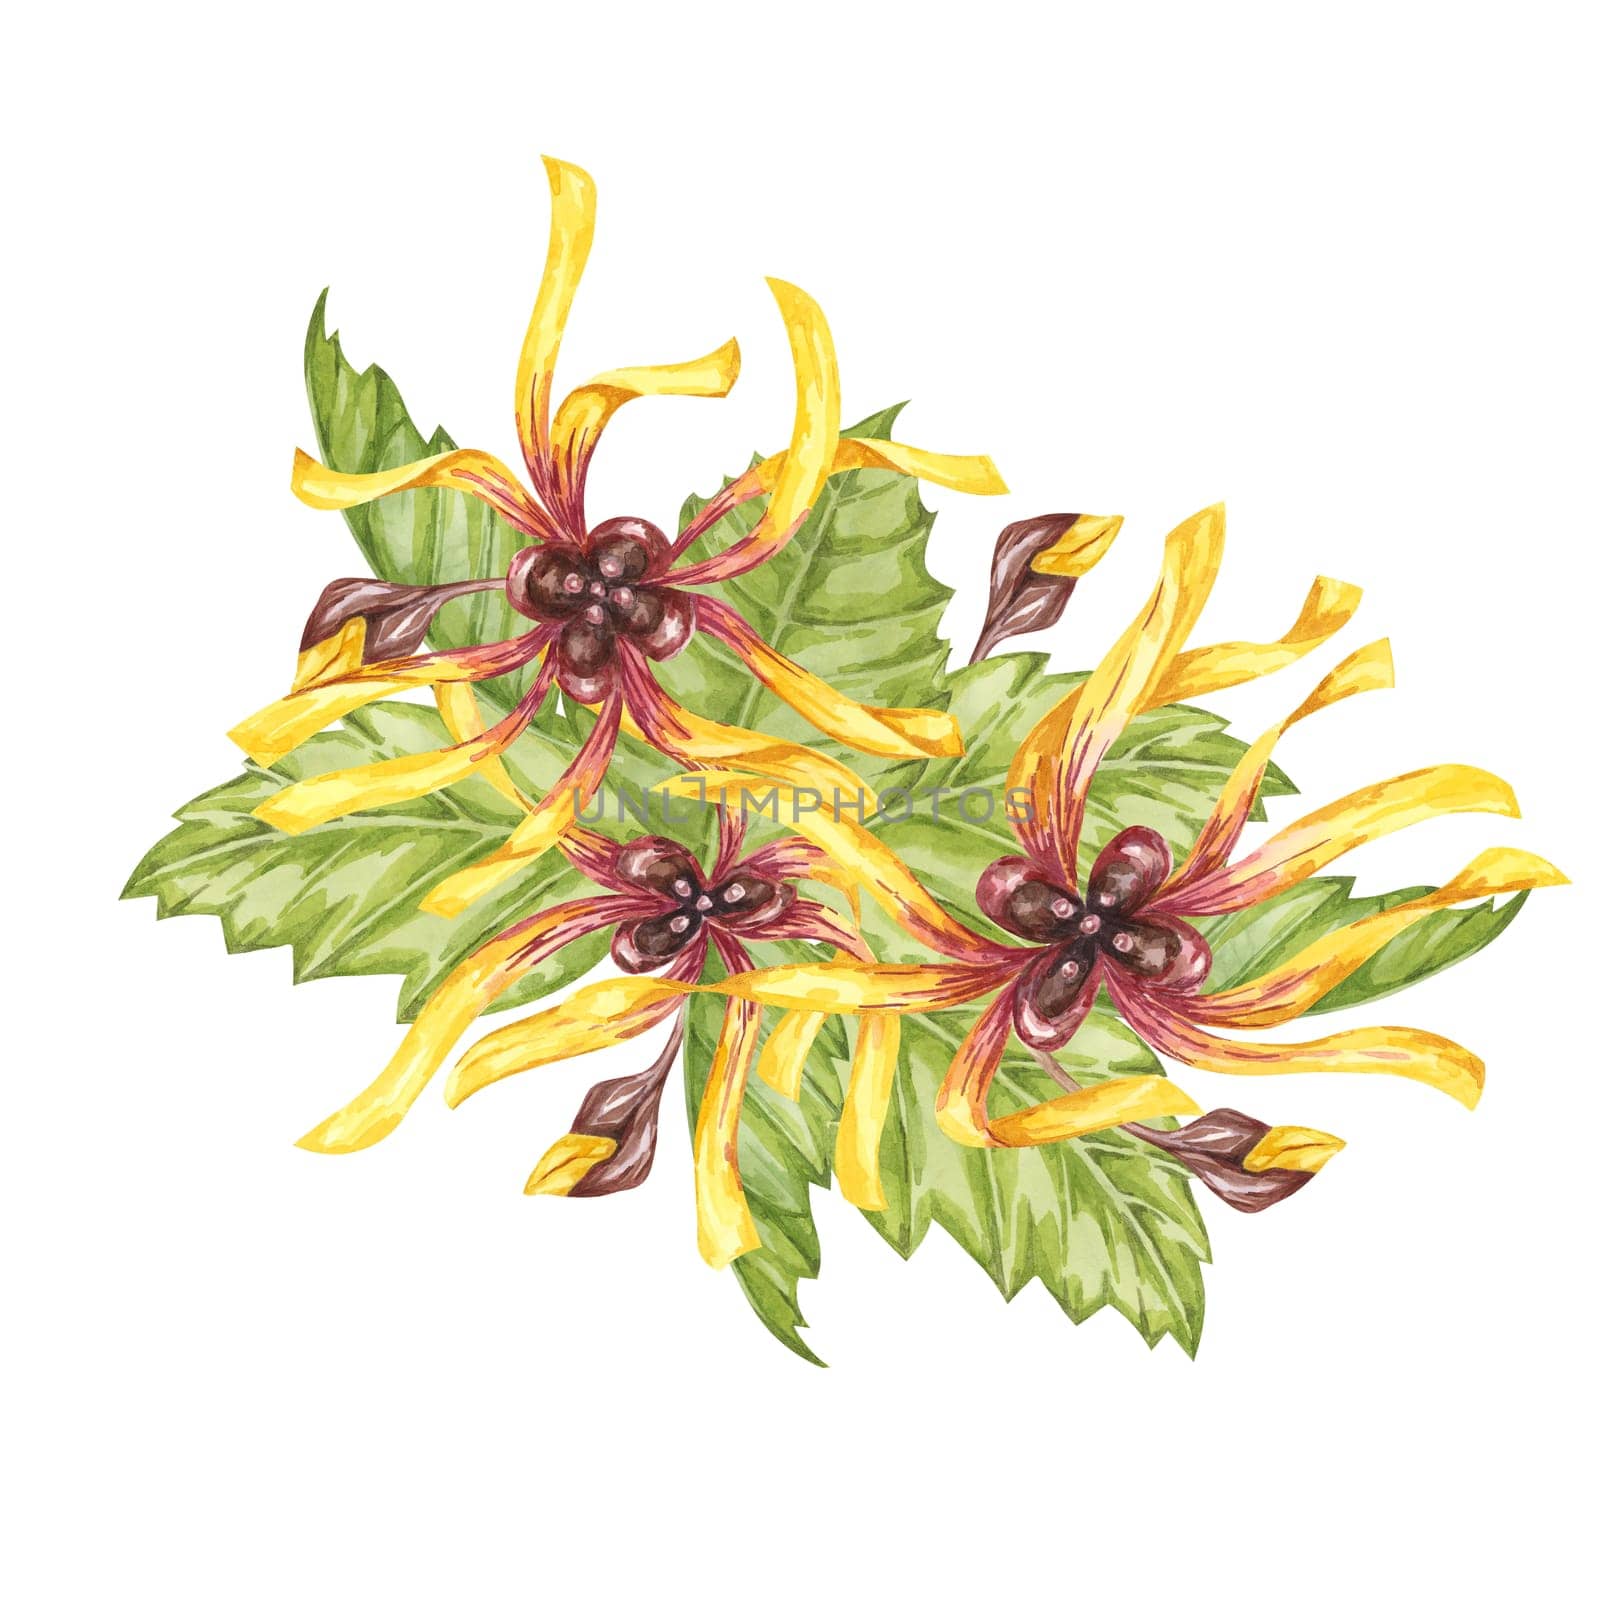 Witch hazel yellow medicinal plant flower and leaves clipart. Hamamelis virginiana in bloom. Watercolor florals for cosmetics, water, herbal medicine, beauty, cream packaging, national day flyer, logo